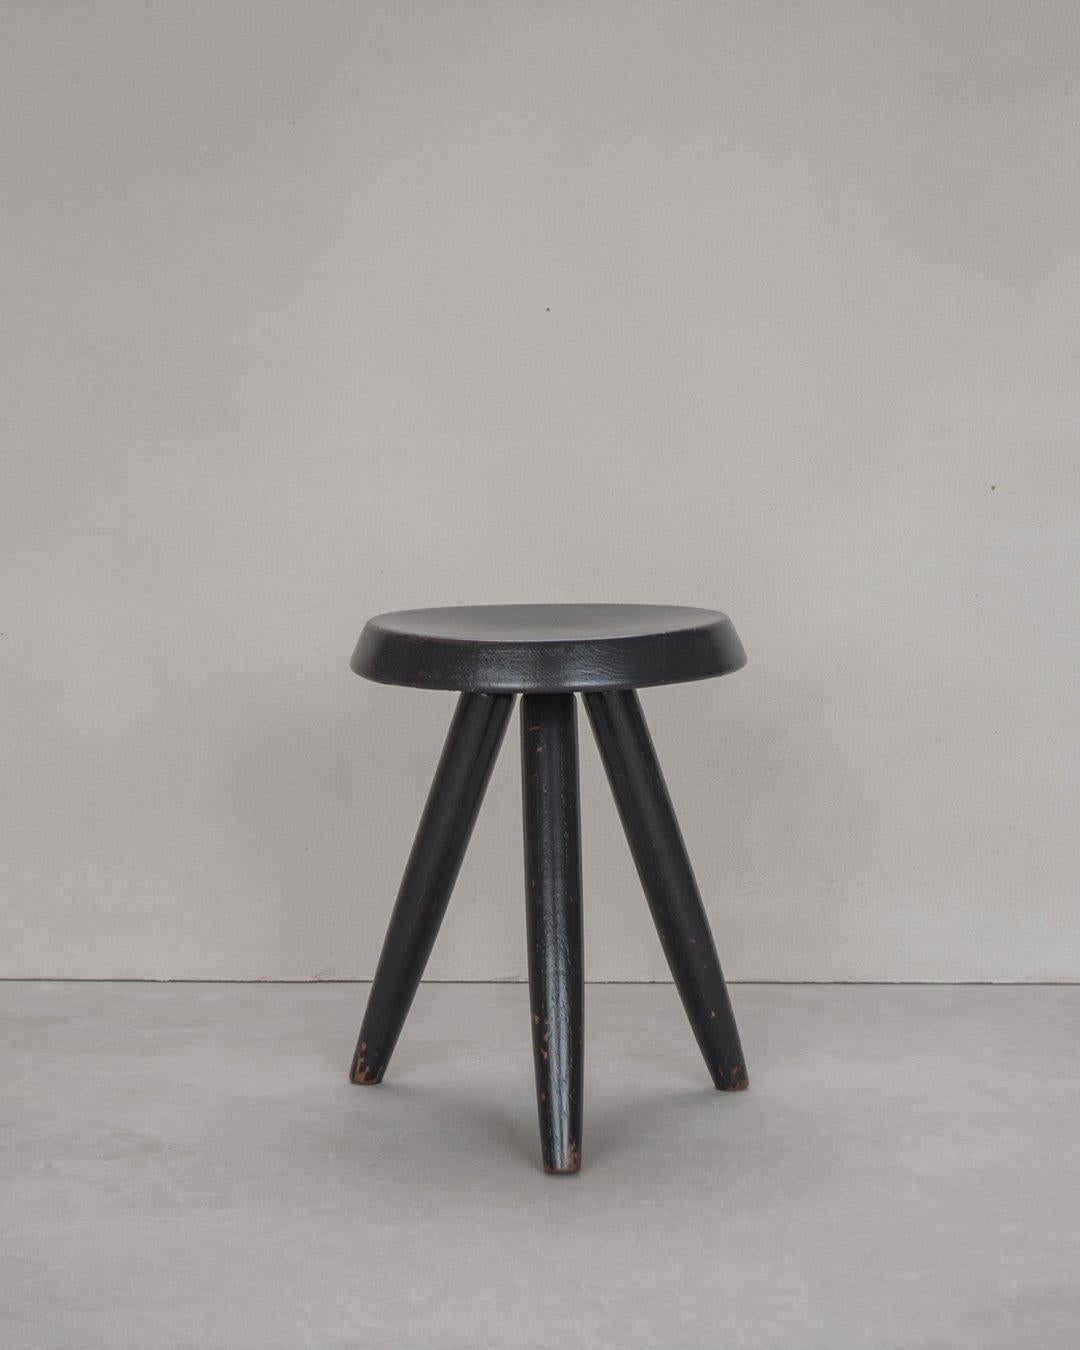 Vintage Berger stool high - circa 1950s - Provenance private residence Paris, France.

The Berger high stool by Robert Sentou is a modern reinterpretation of the original Berger stool designed by Charlotte Perriand. Sentou was a French furniture